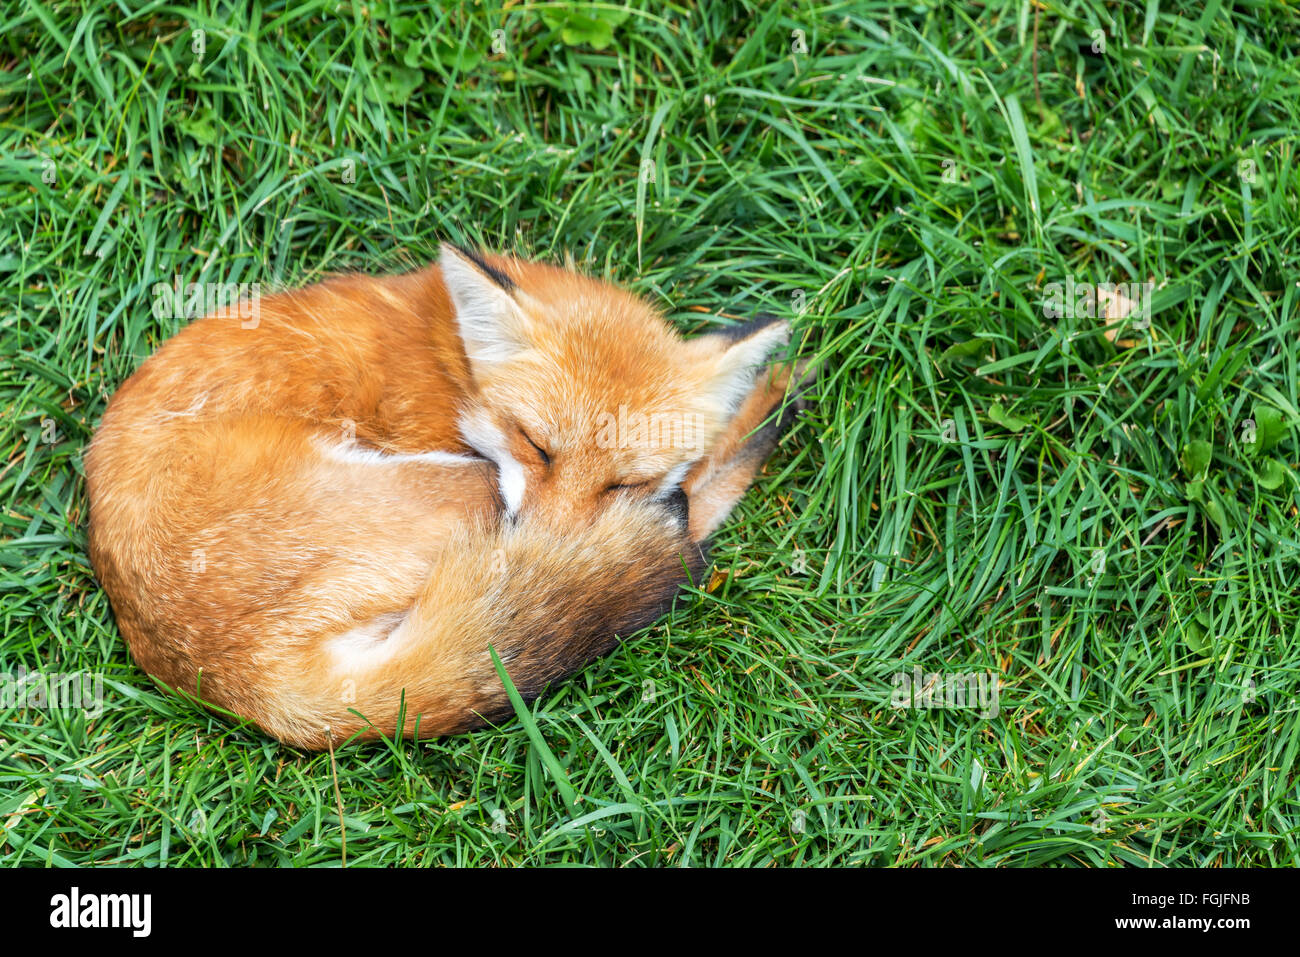 Fox relaxing in a field of green grass Stock Photo